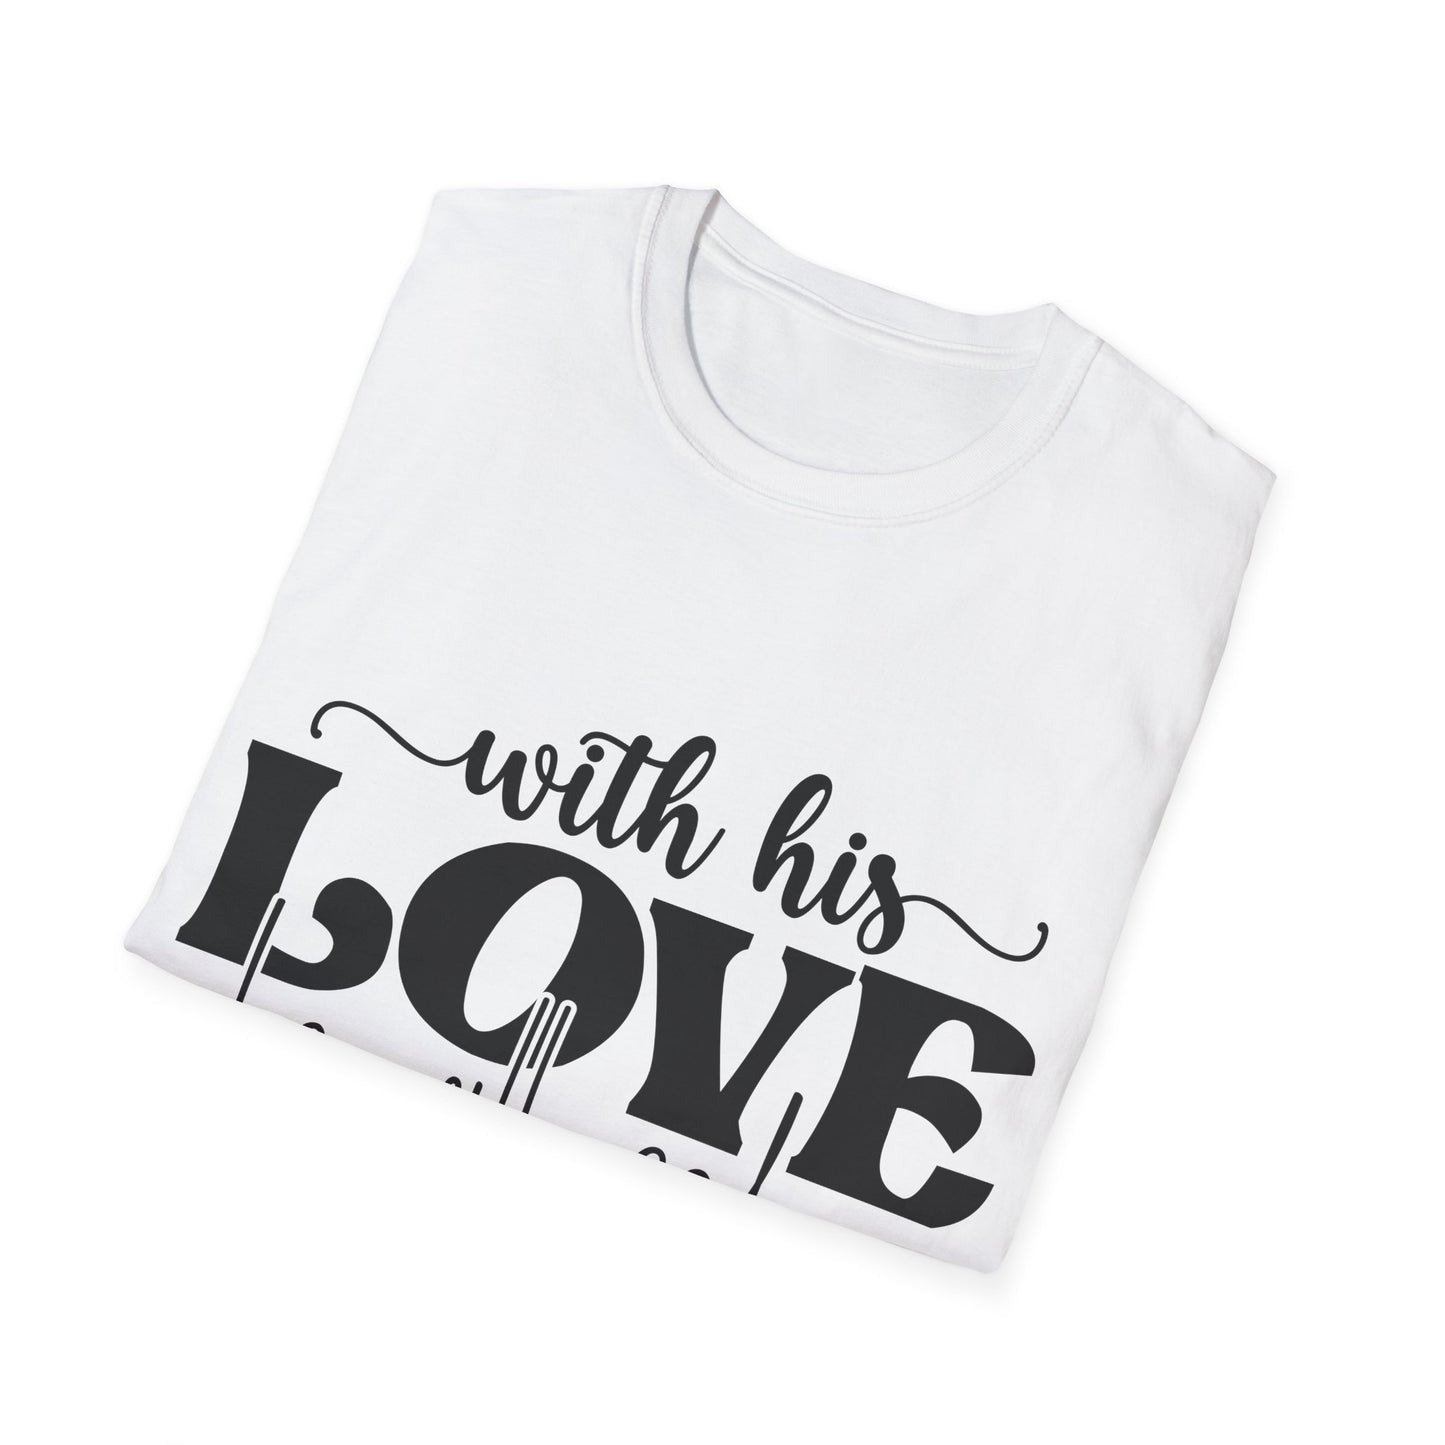 With His Love He Will Calm All Your Fears Zephaniah 3:17 (4) Triple Viking T-Shirt